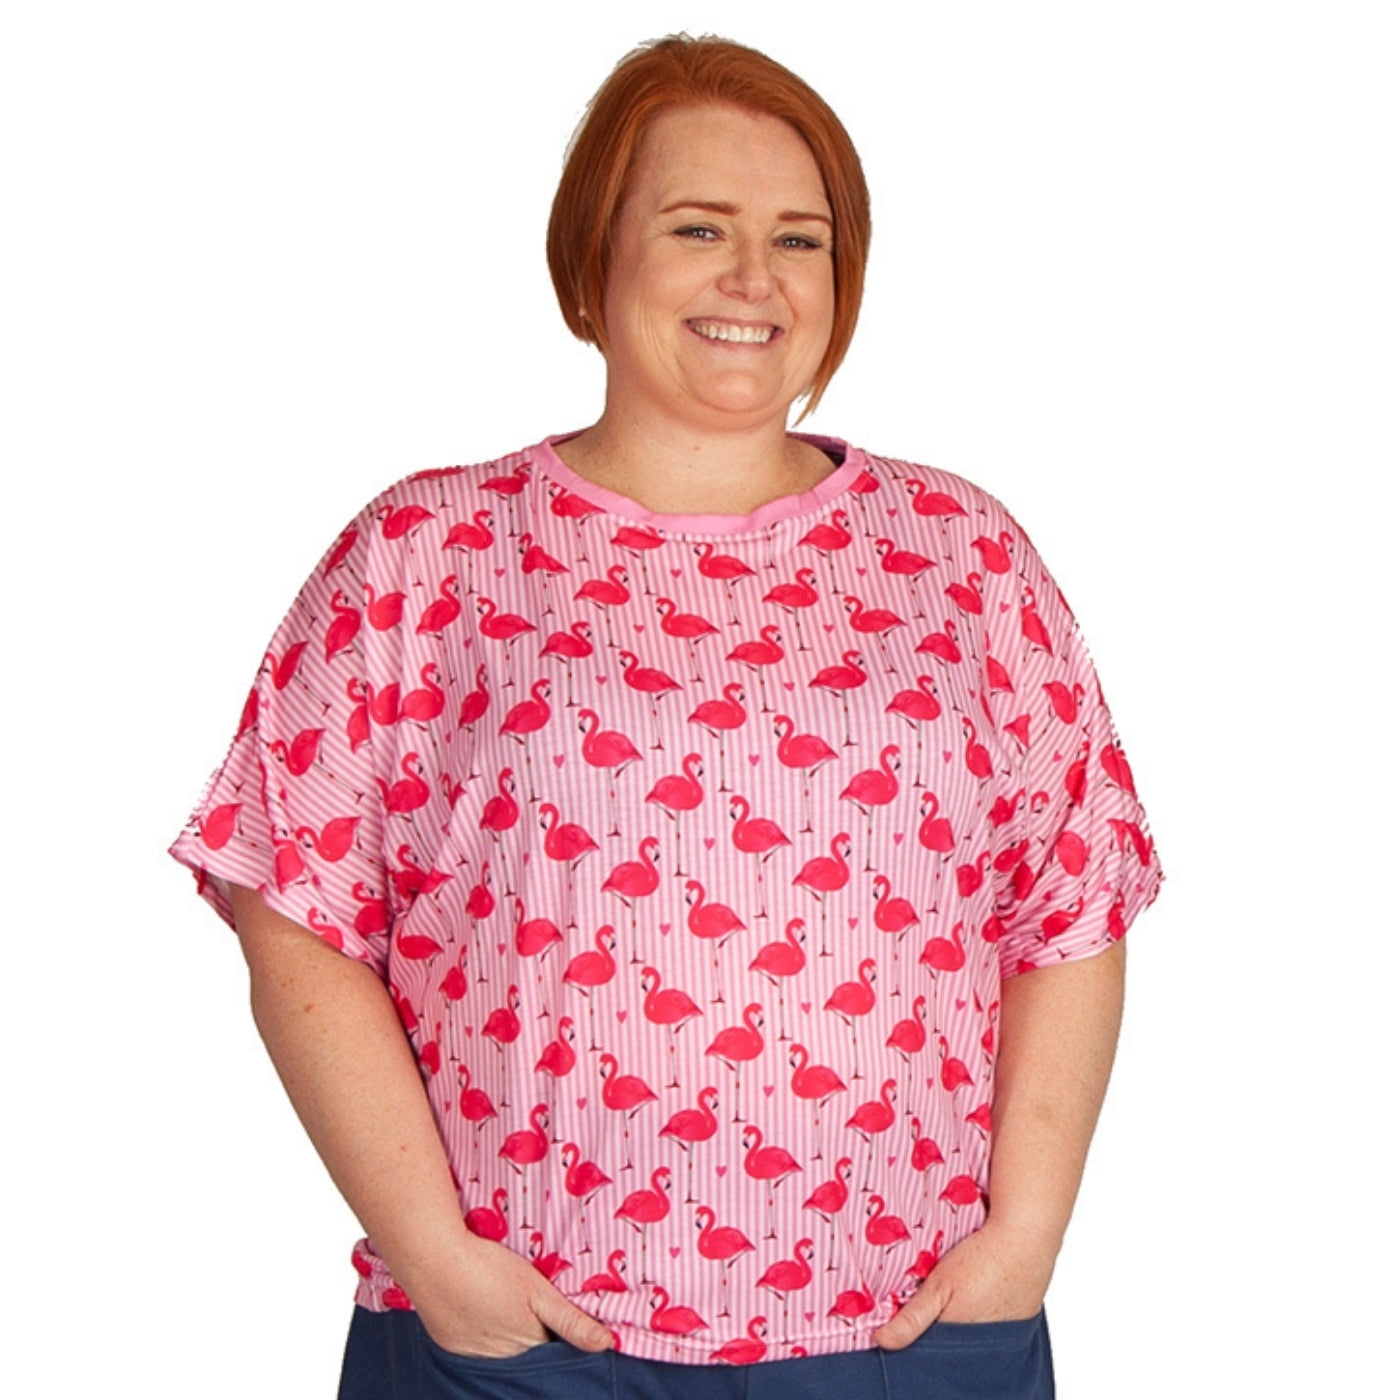 Flamingo Love Batwing Top by RainbowsAndFairies.com (Pink & White - Stripes - Love Hearts - Kitsch - Shirt - Vintage Inspired - Rock & Roll) - SKU: CL_BATOP_FLOVE_ORG - Pic 03